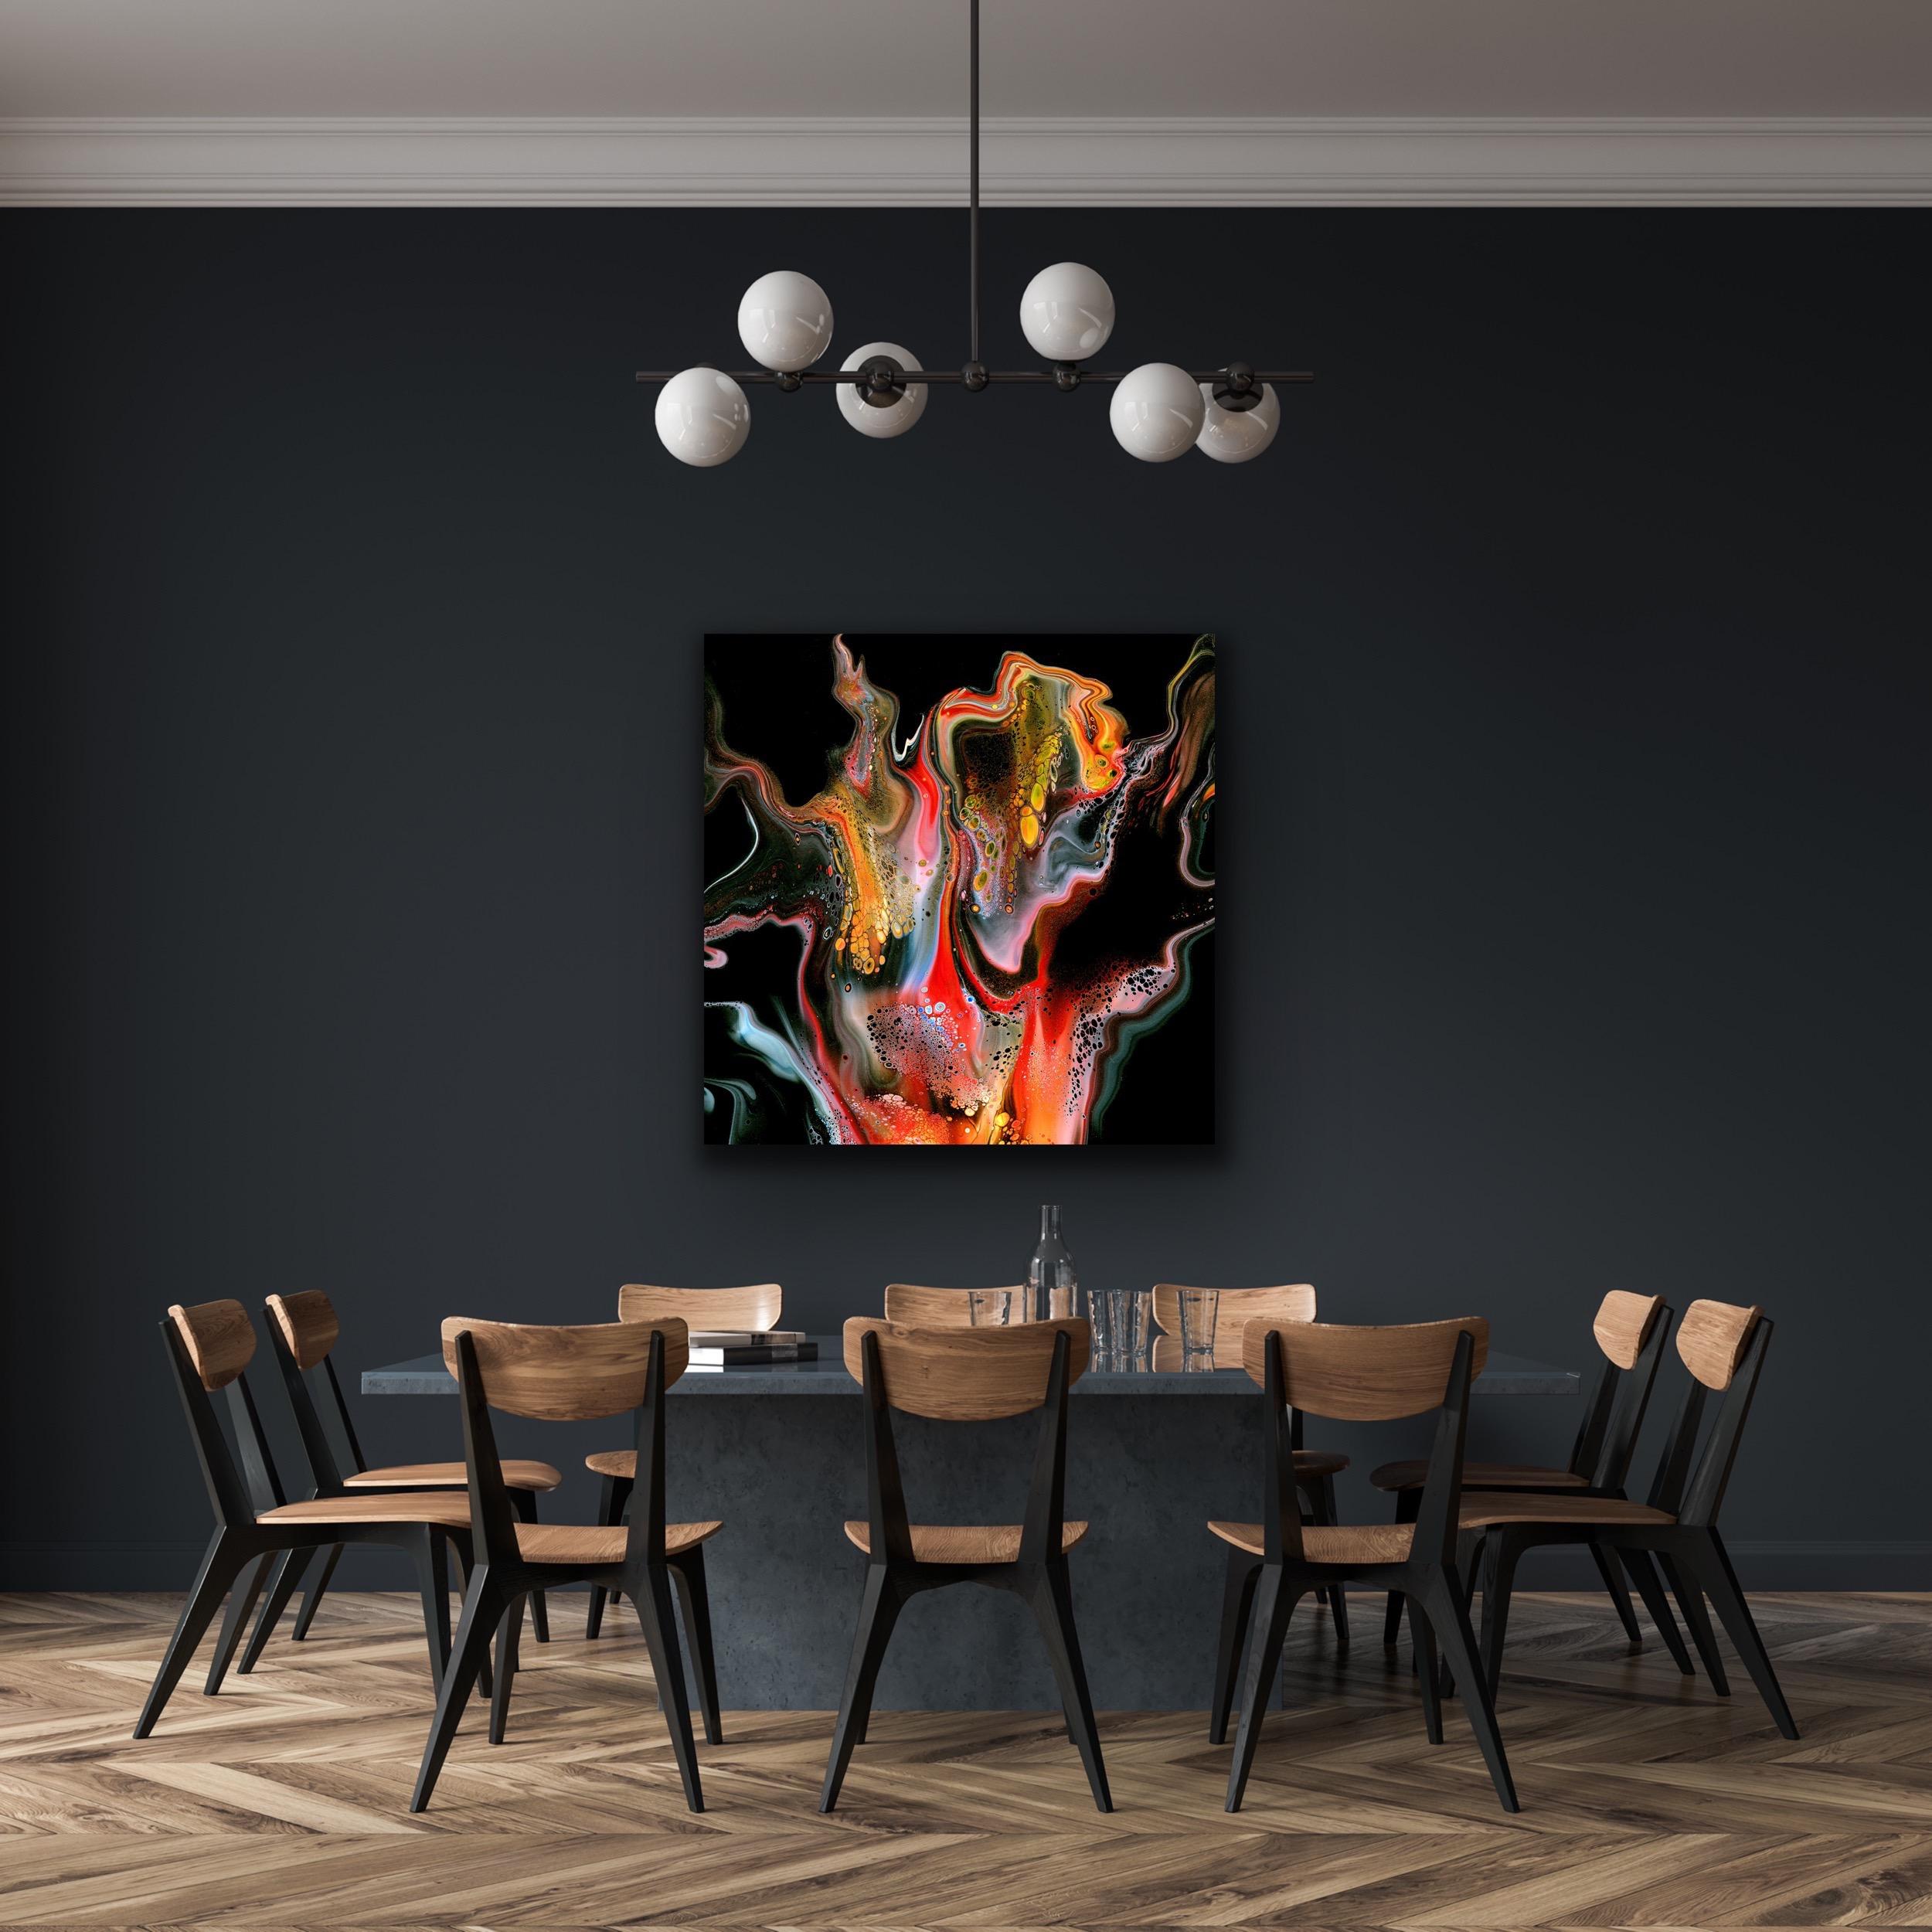 Contemporary Modern Abstract, Giclee Print on Metal, Limited Edition, by Cessy  For Sale 1